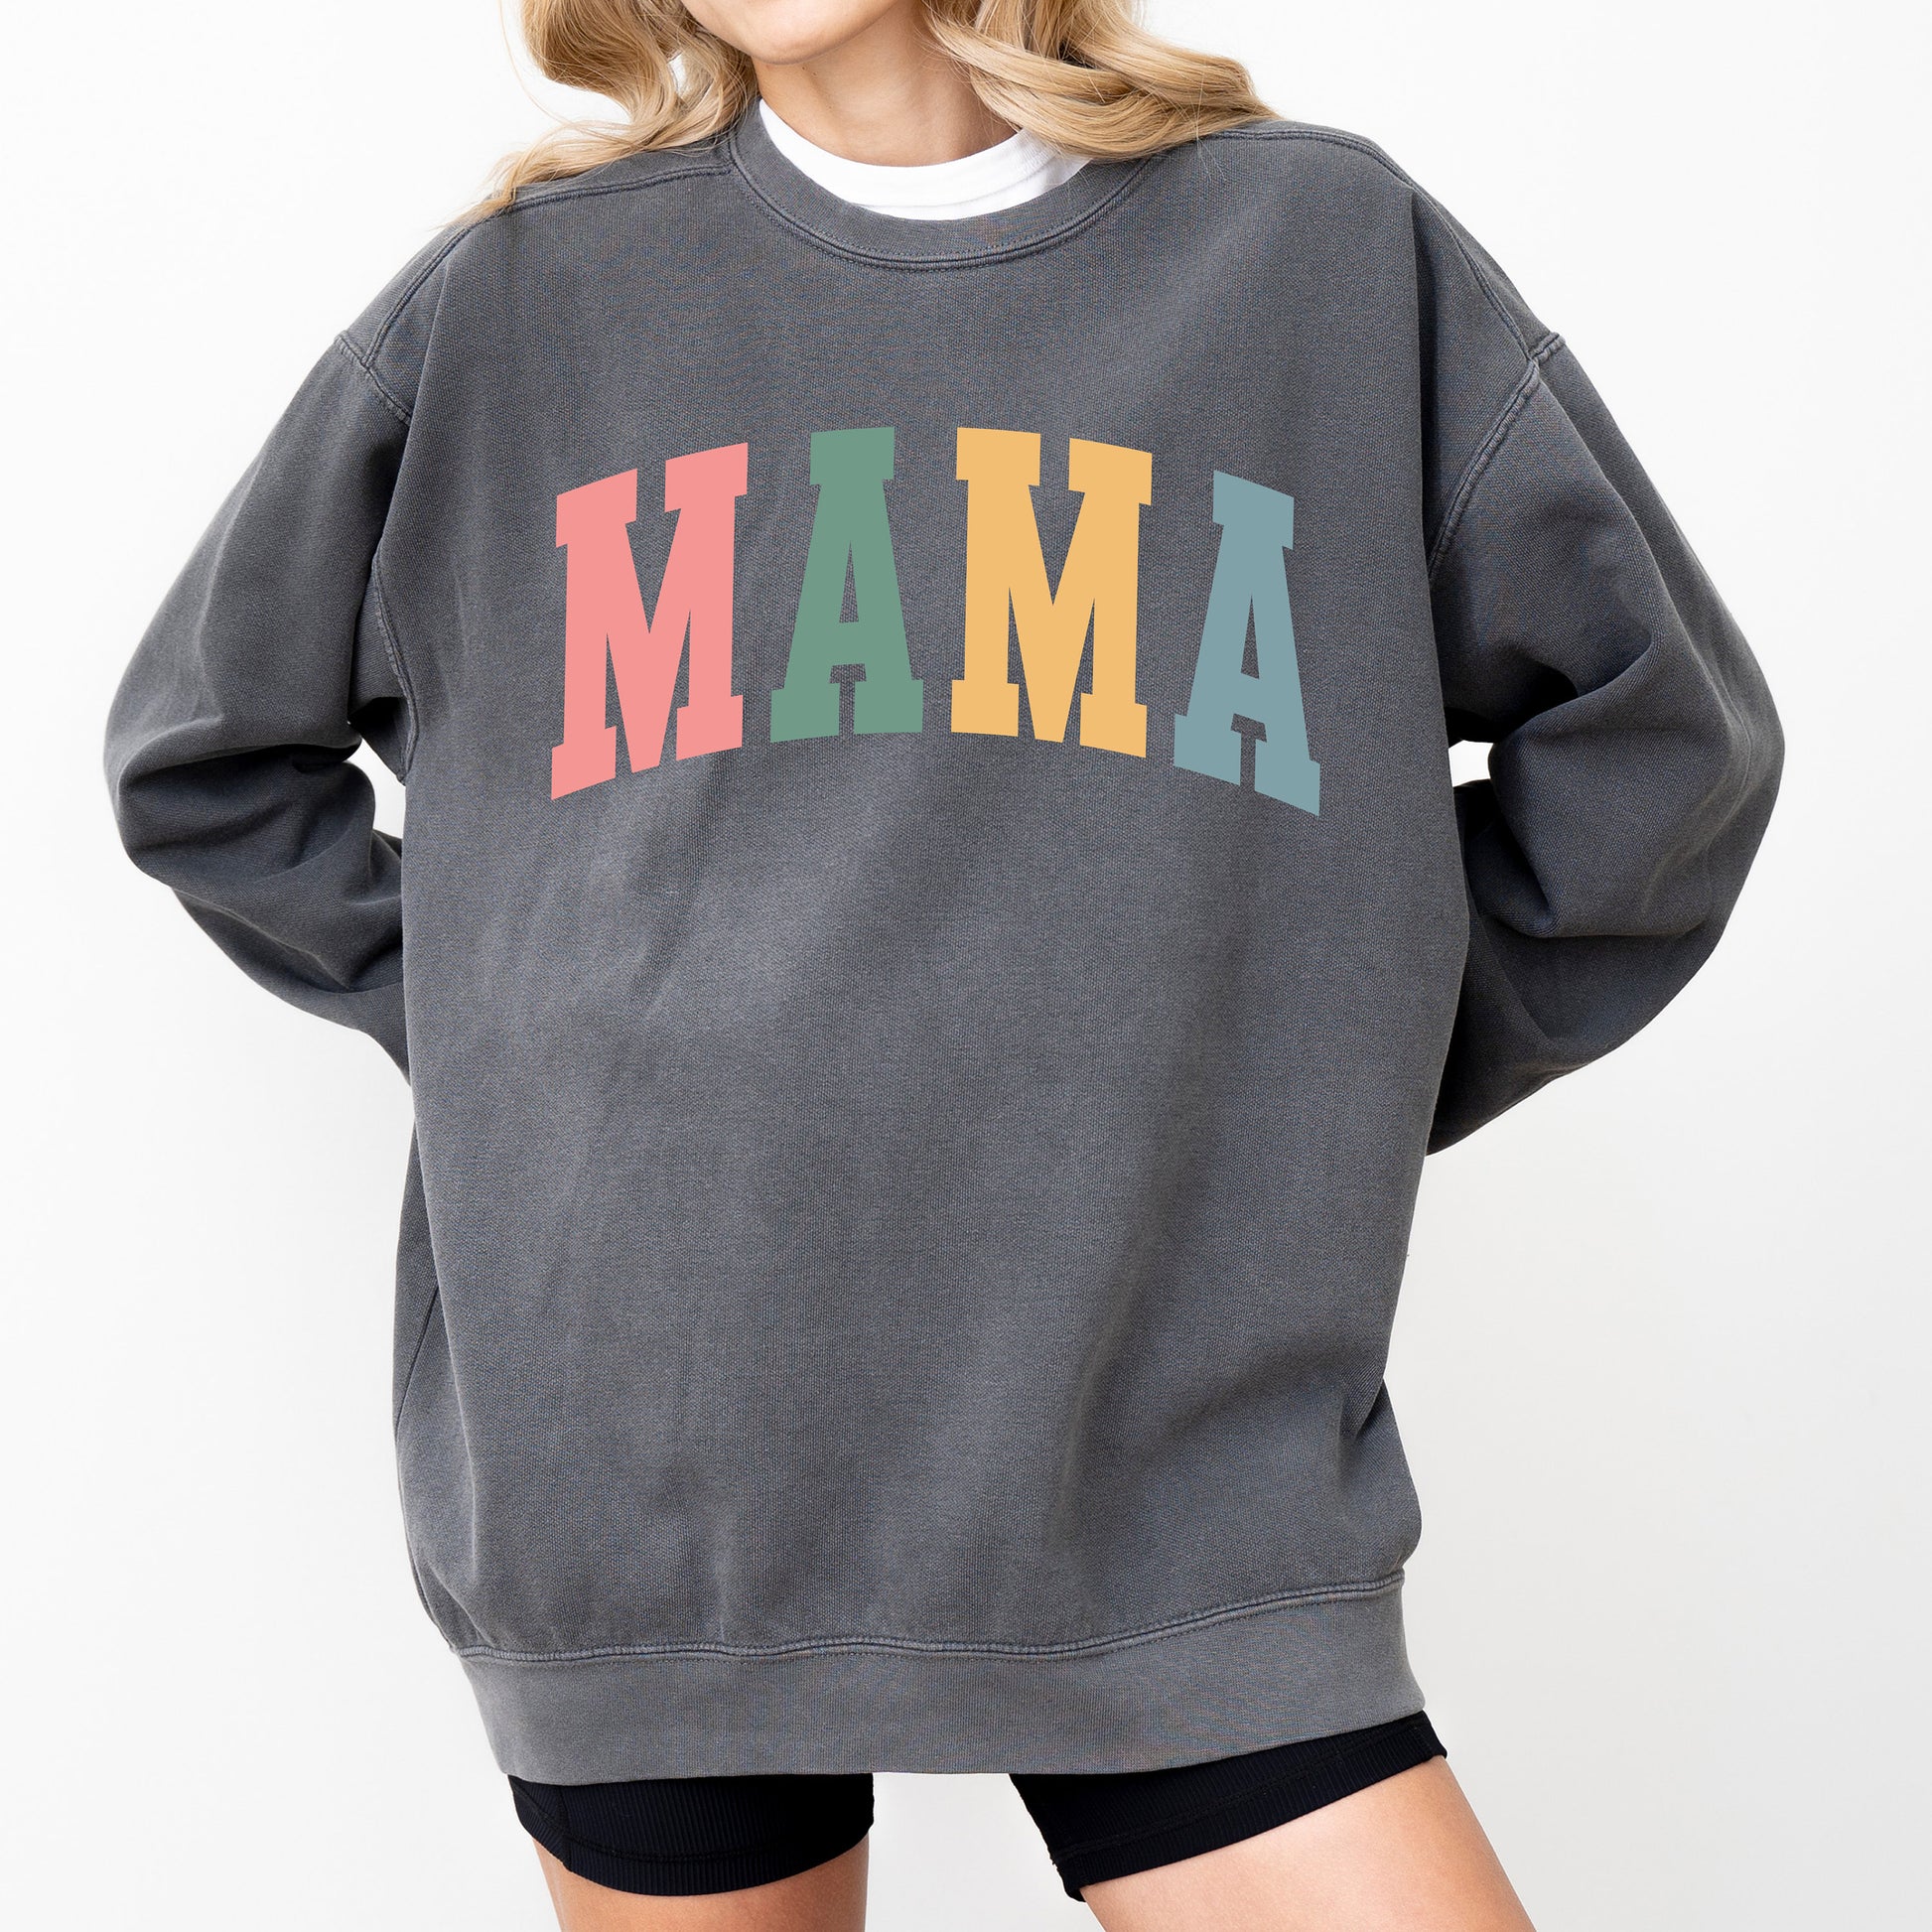 Mama Sweatshirt | MultiColor Letters | Ink Printed Lettering | Gift for Mom | Mama Sweater